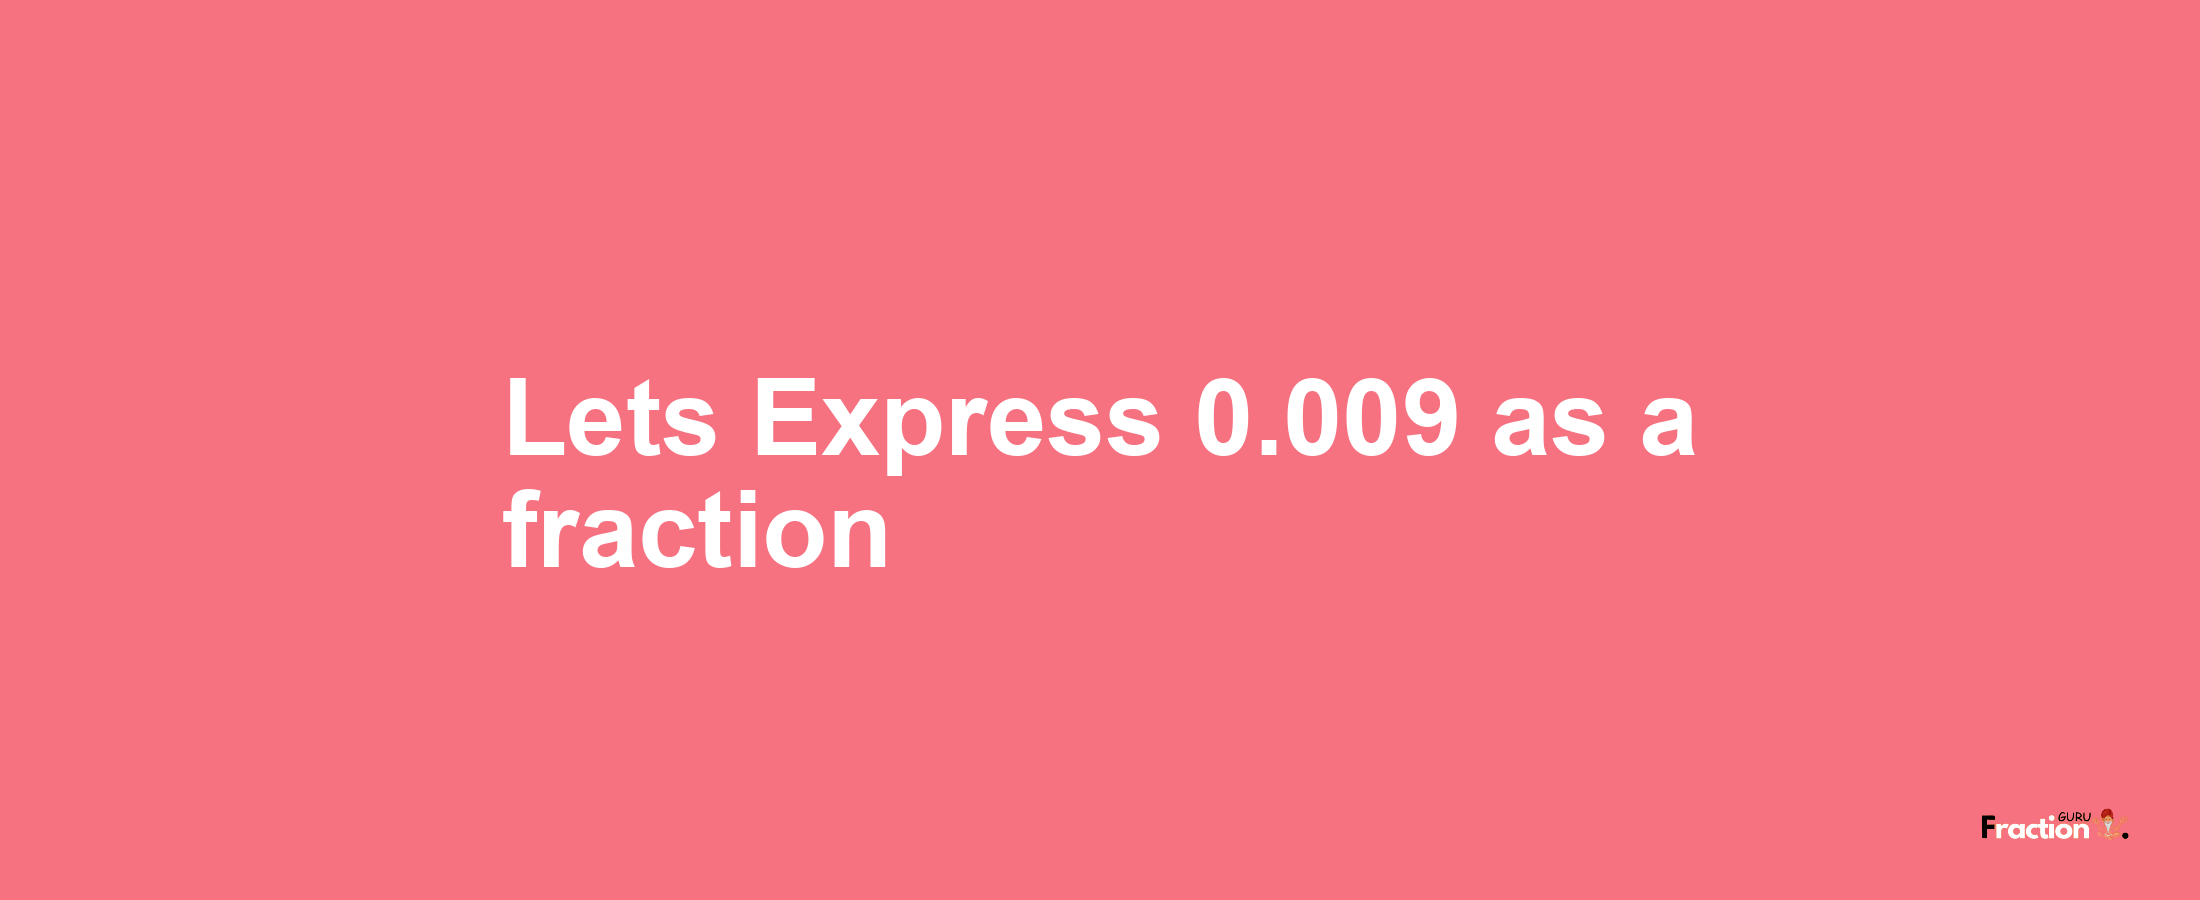 Lets Express 0.009 as afraction